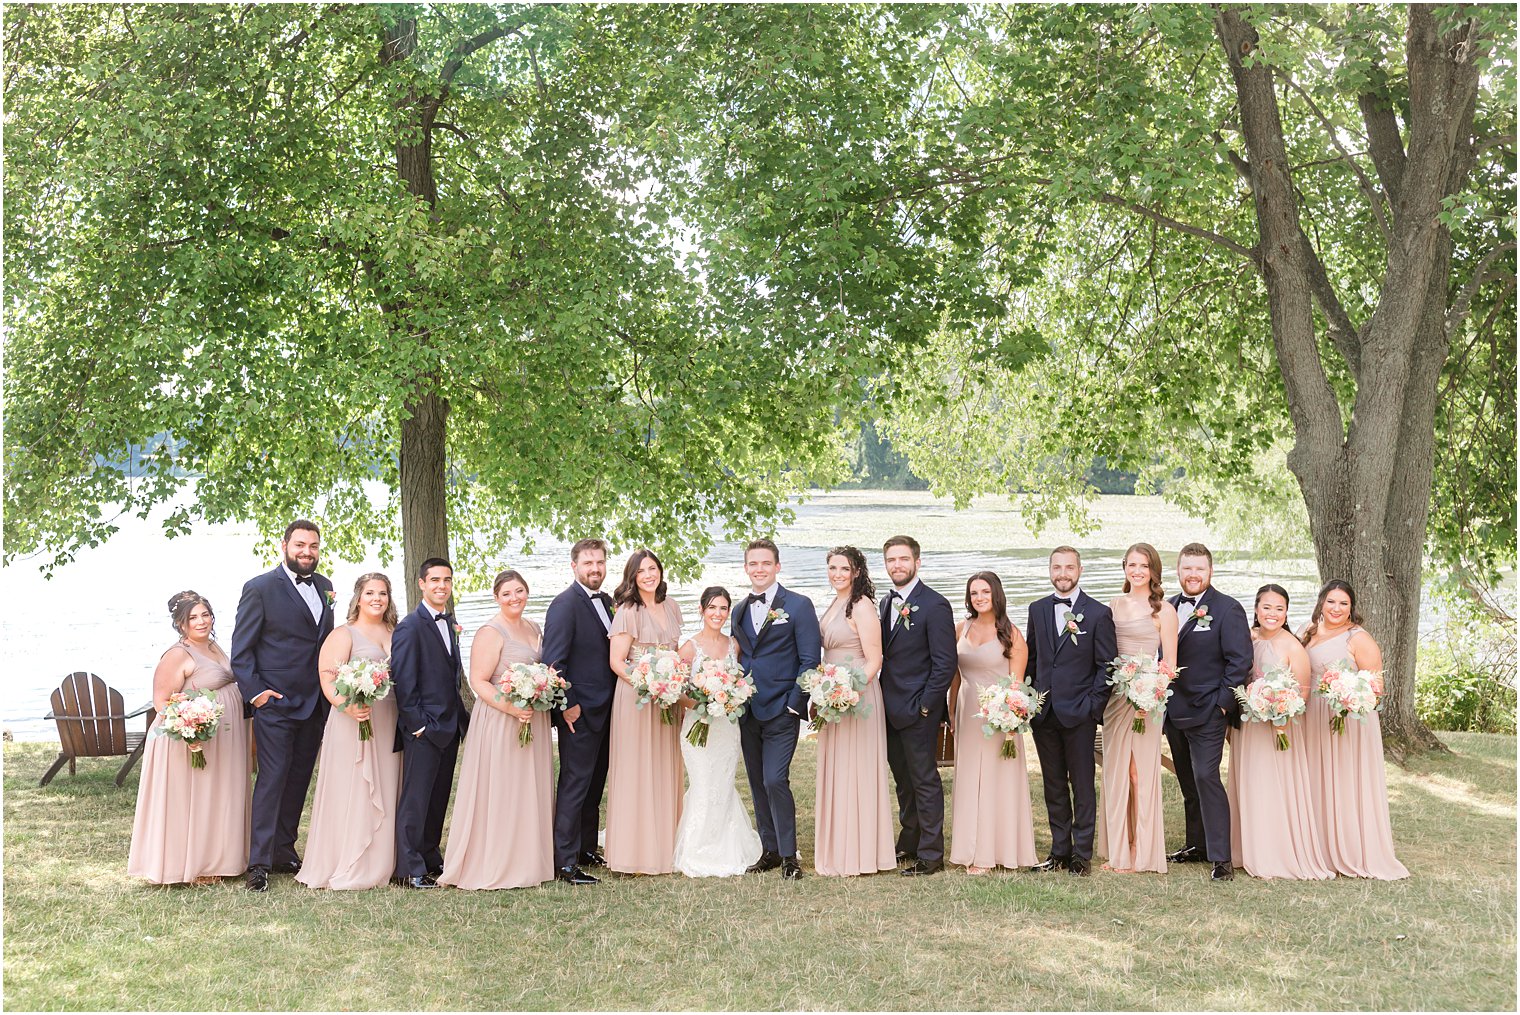 newlyweds pose with wedding party in pink and navy blue